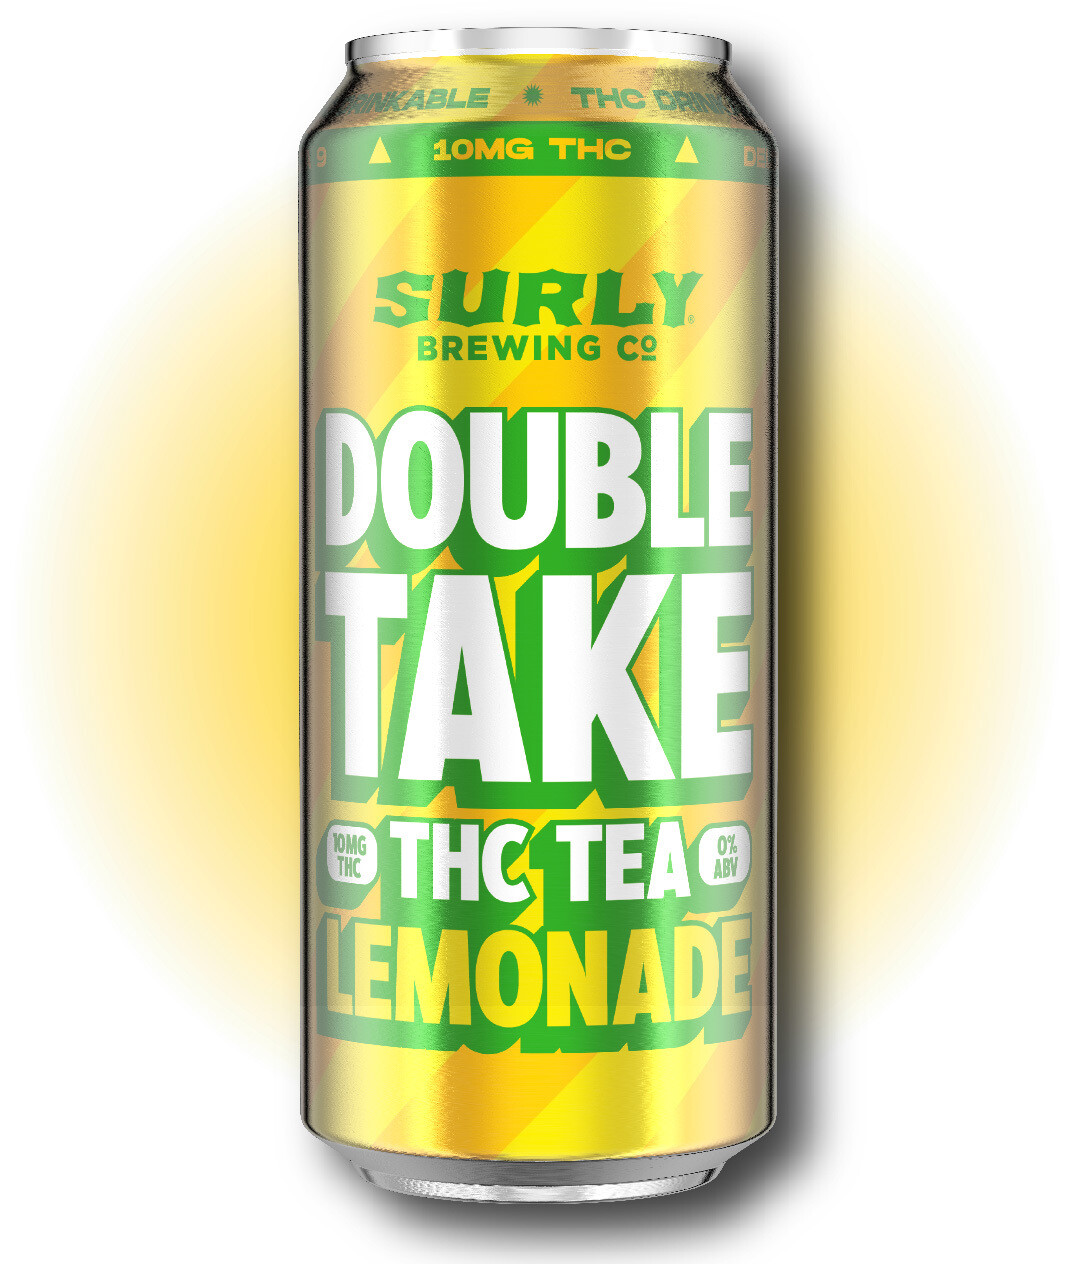 Surly "Double Take" THC Tea and Lemonade Beverage (10mg of THC)